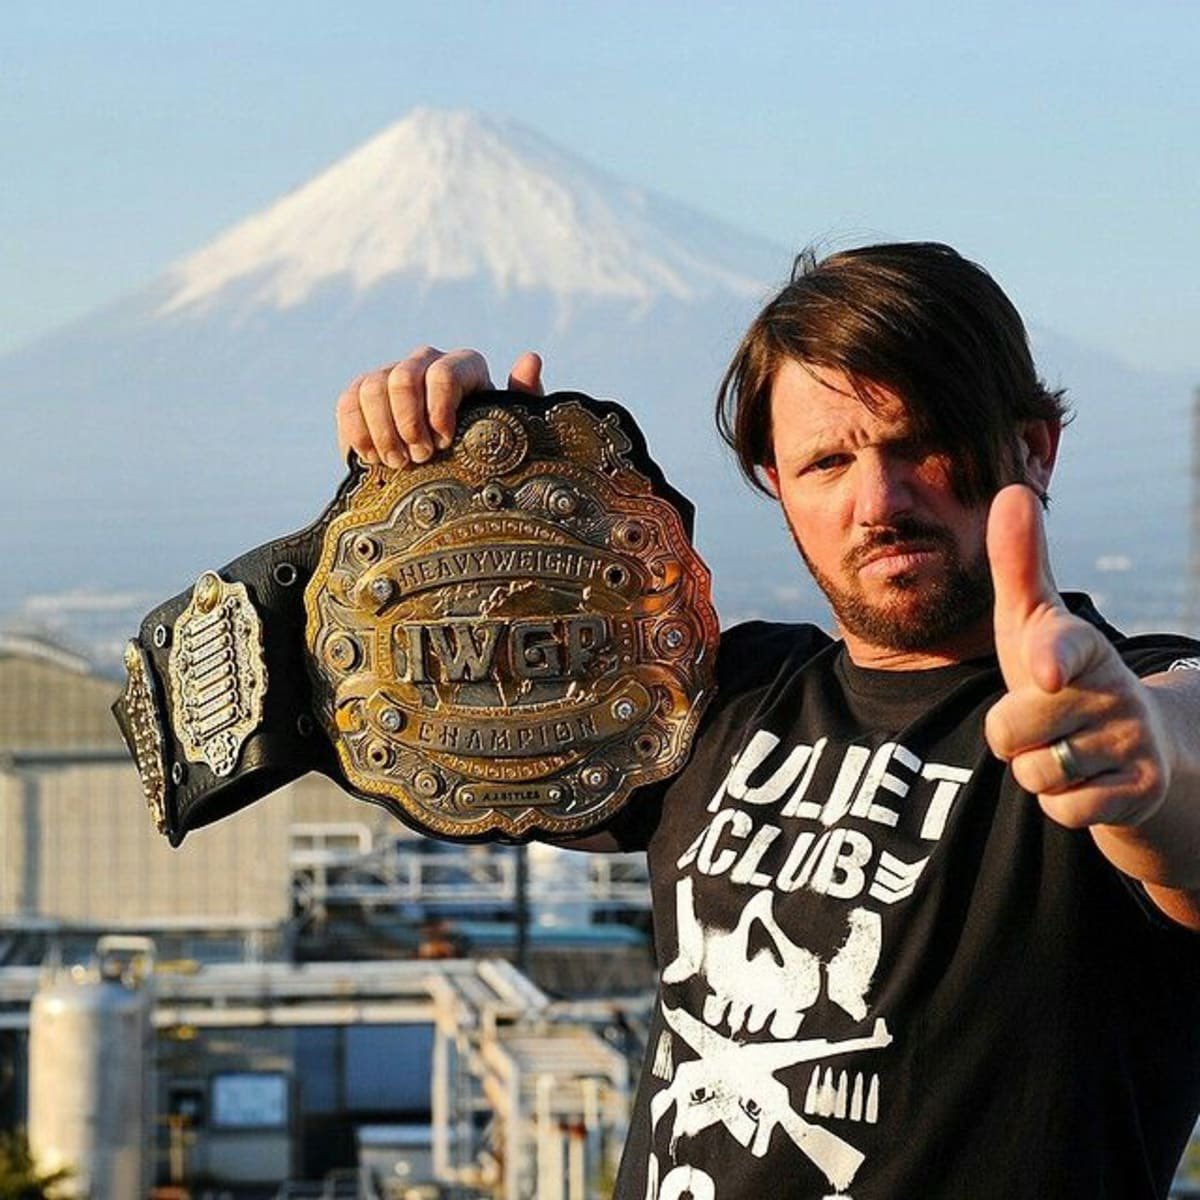 AJ Styles is one of the greatest to ever do it. Bullet Club 4 Life!